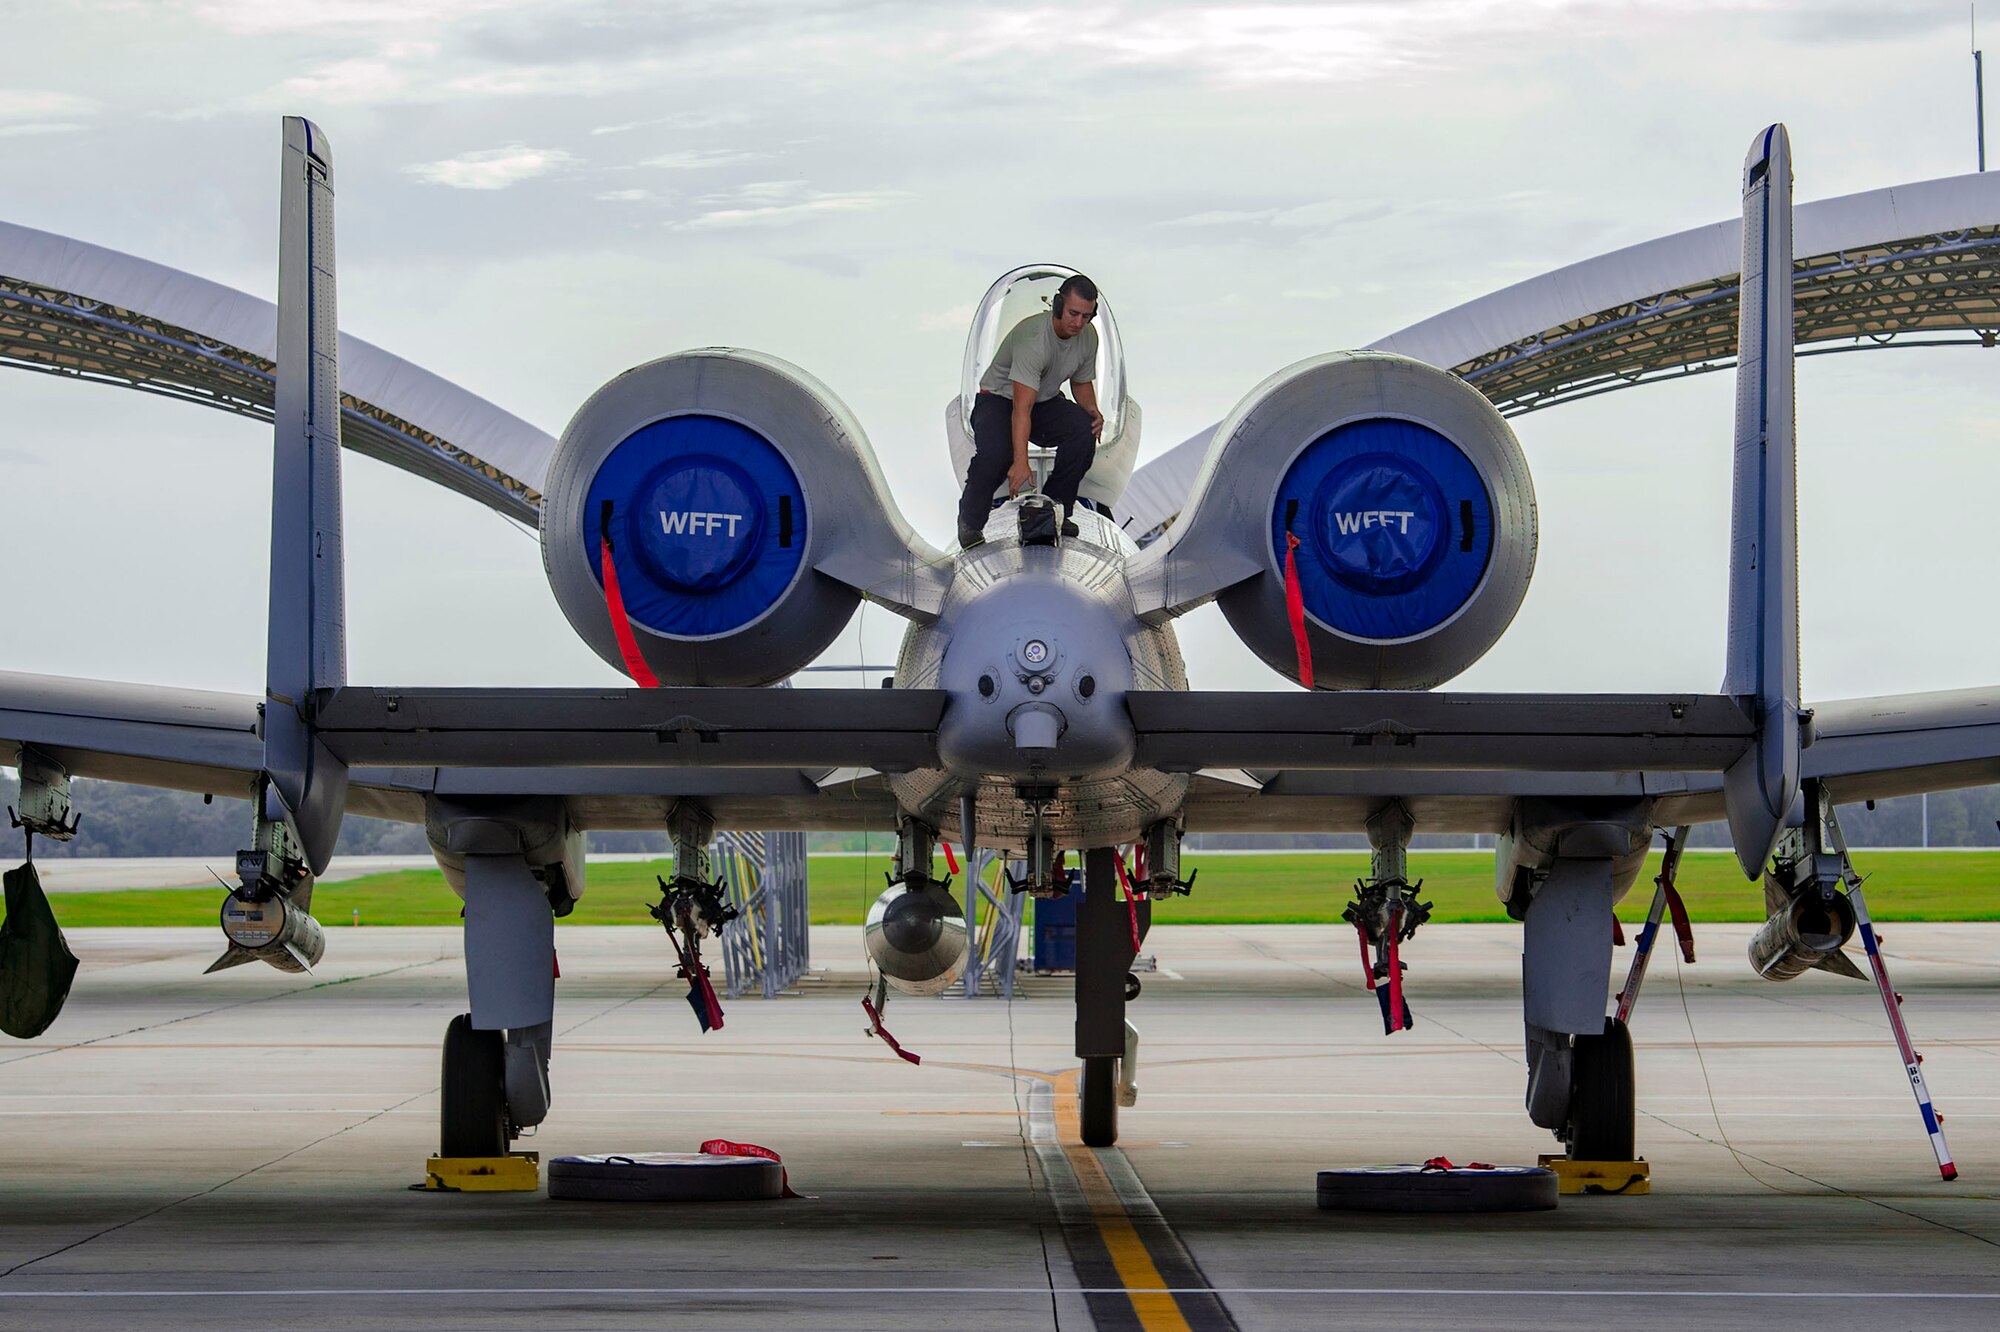 A 23d Maintenance Group A-10C Thunderbolt II crew chief prepares an aircraft for relocation in anticipation of Hurricane Michael, Oct. 9, 2018, at Moody Air Force Base, Ga. To safeguard flying assets, Moody is repositioning some aircraft to avoid the predicted tropical-storm-force winds in the Southeast region. (U.S. Air Force photo by Senior Airman Greg Nash)